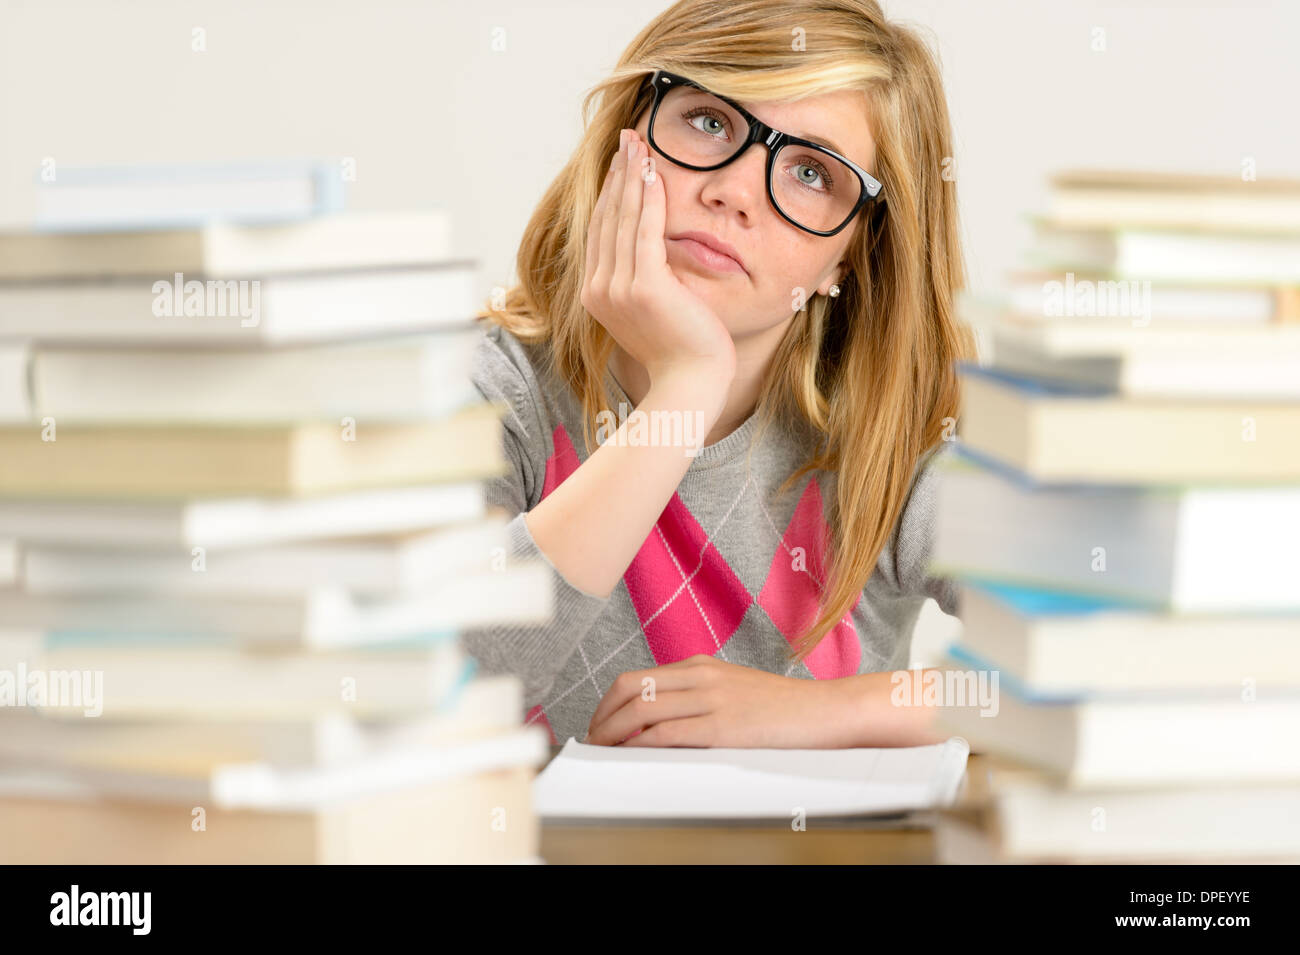 Bored student girl between stack of books looking up glasses Stock Photo